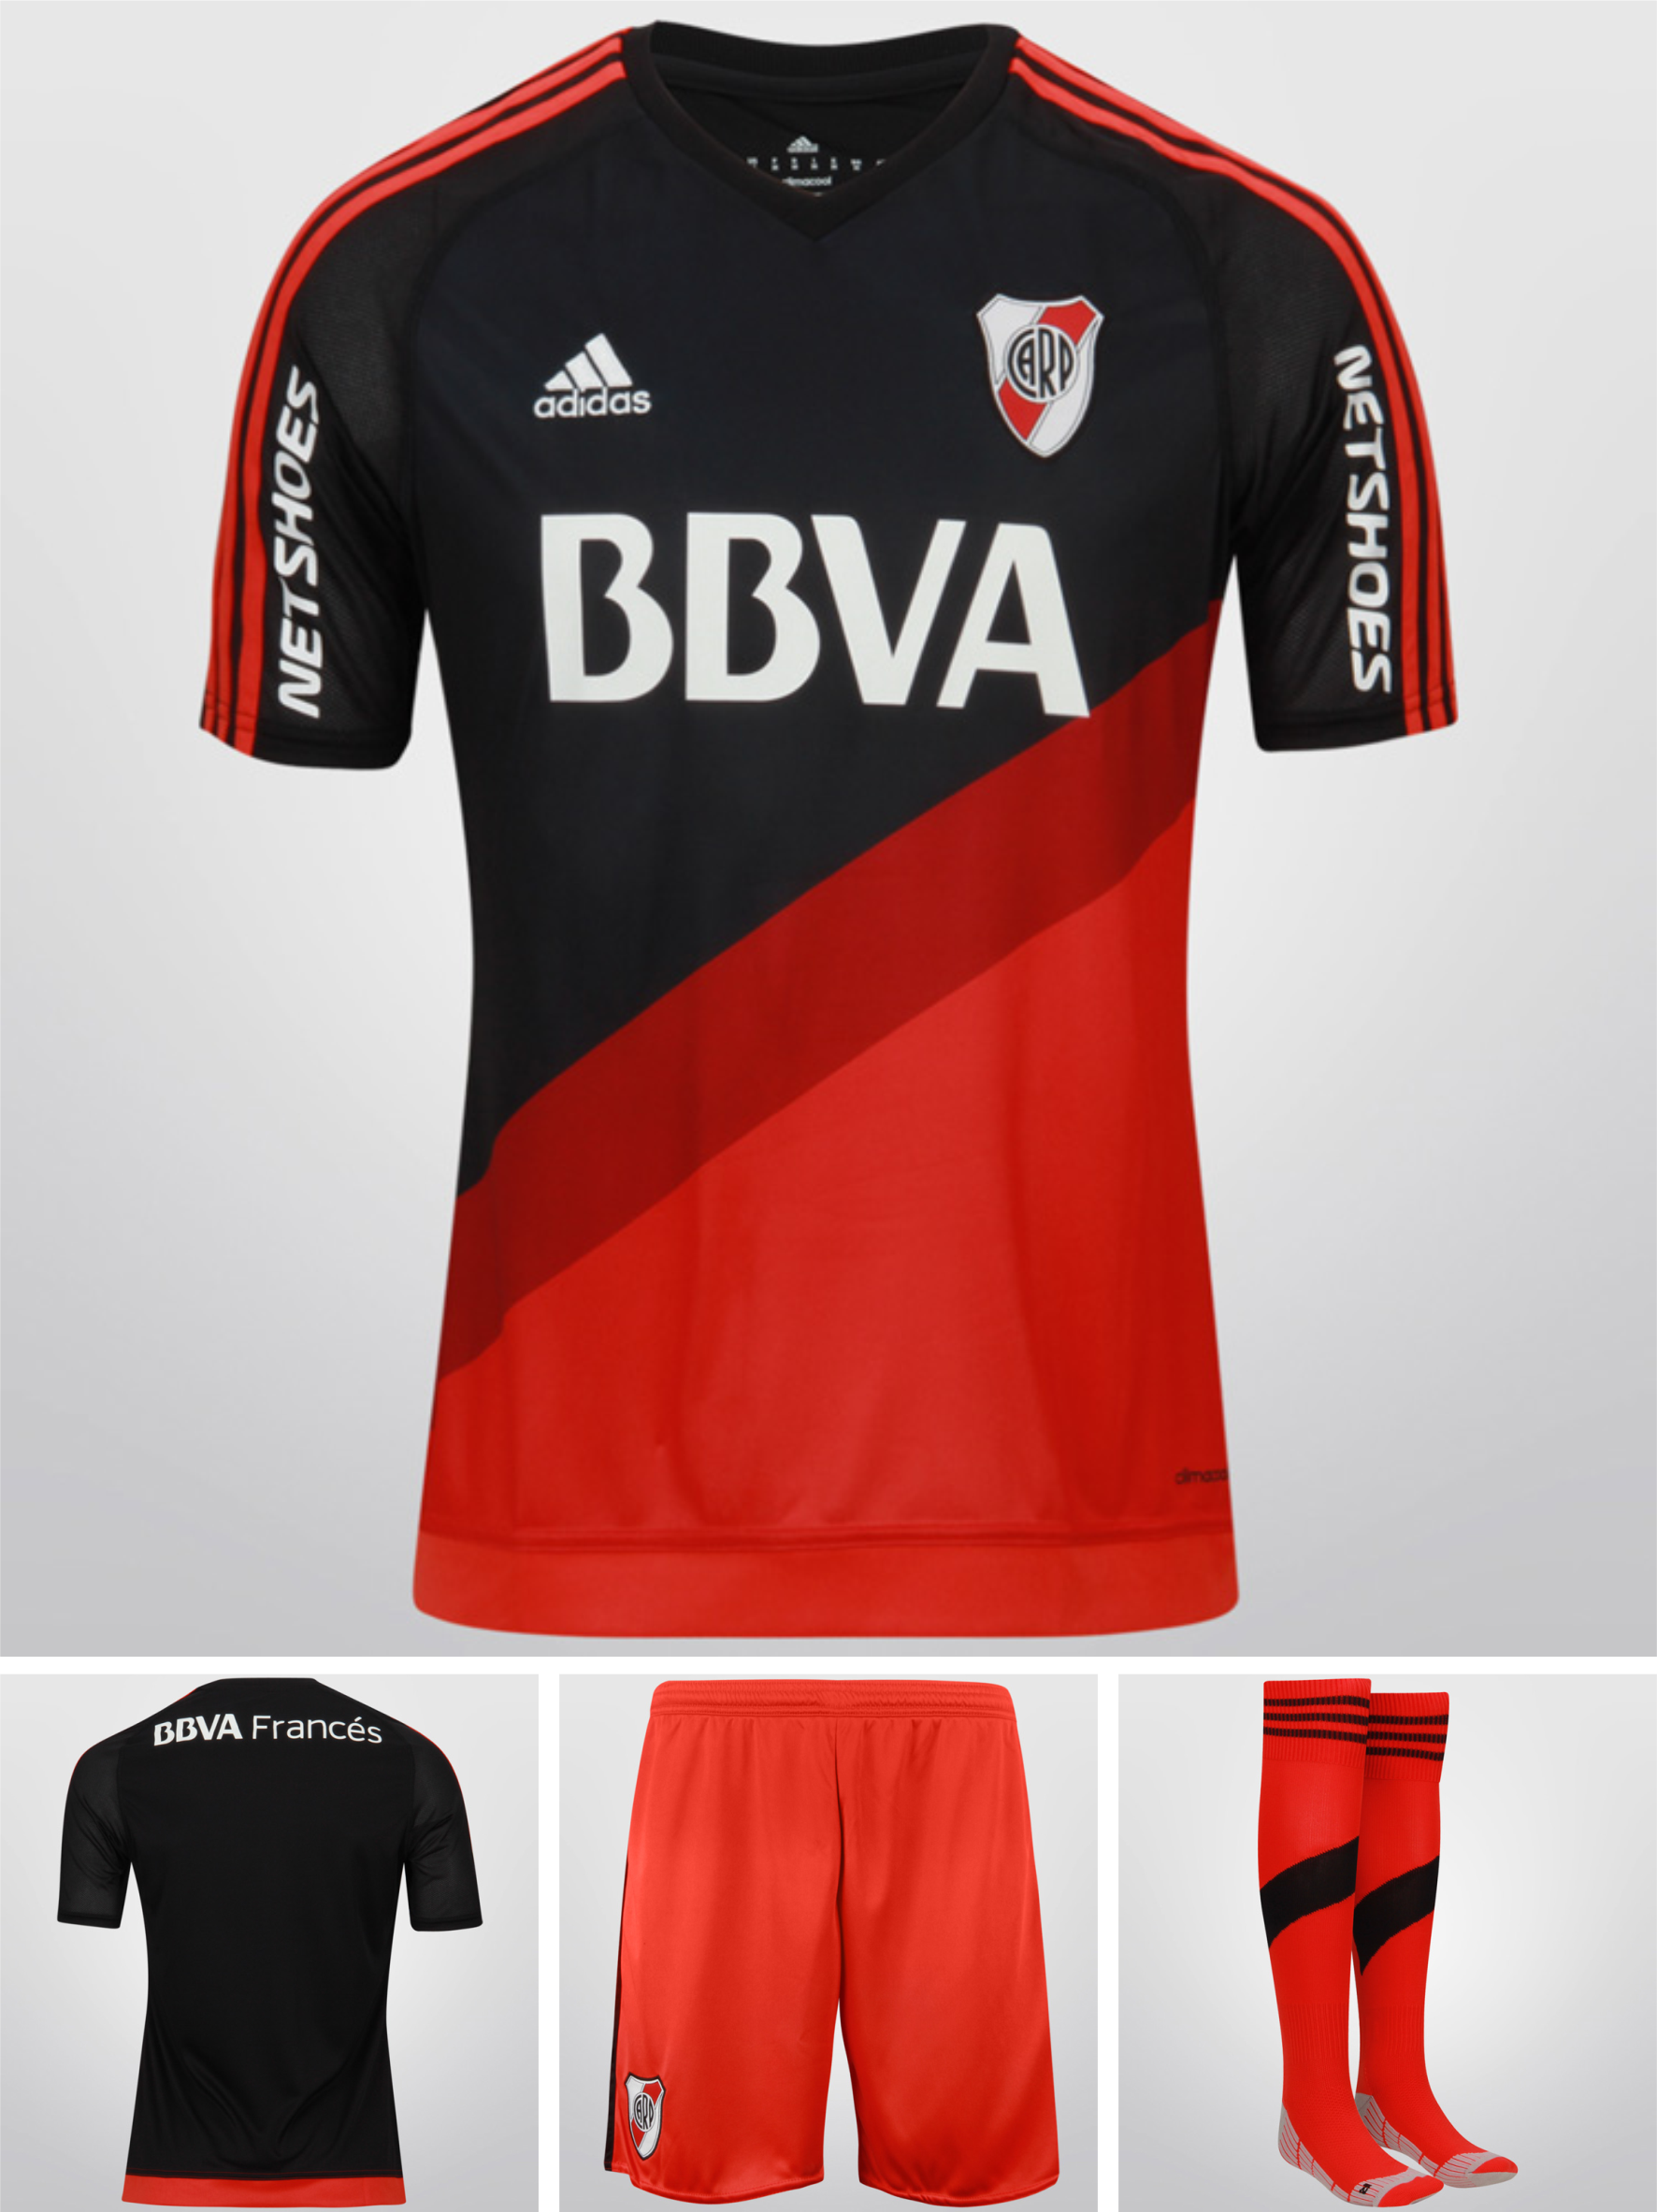 camisa river plate netshoes